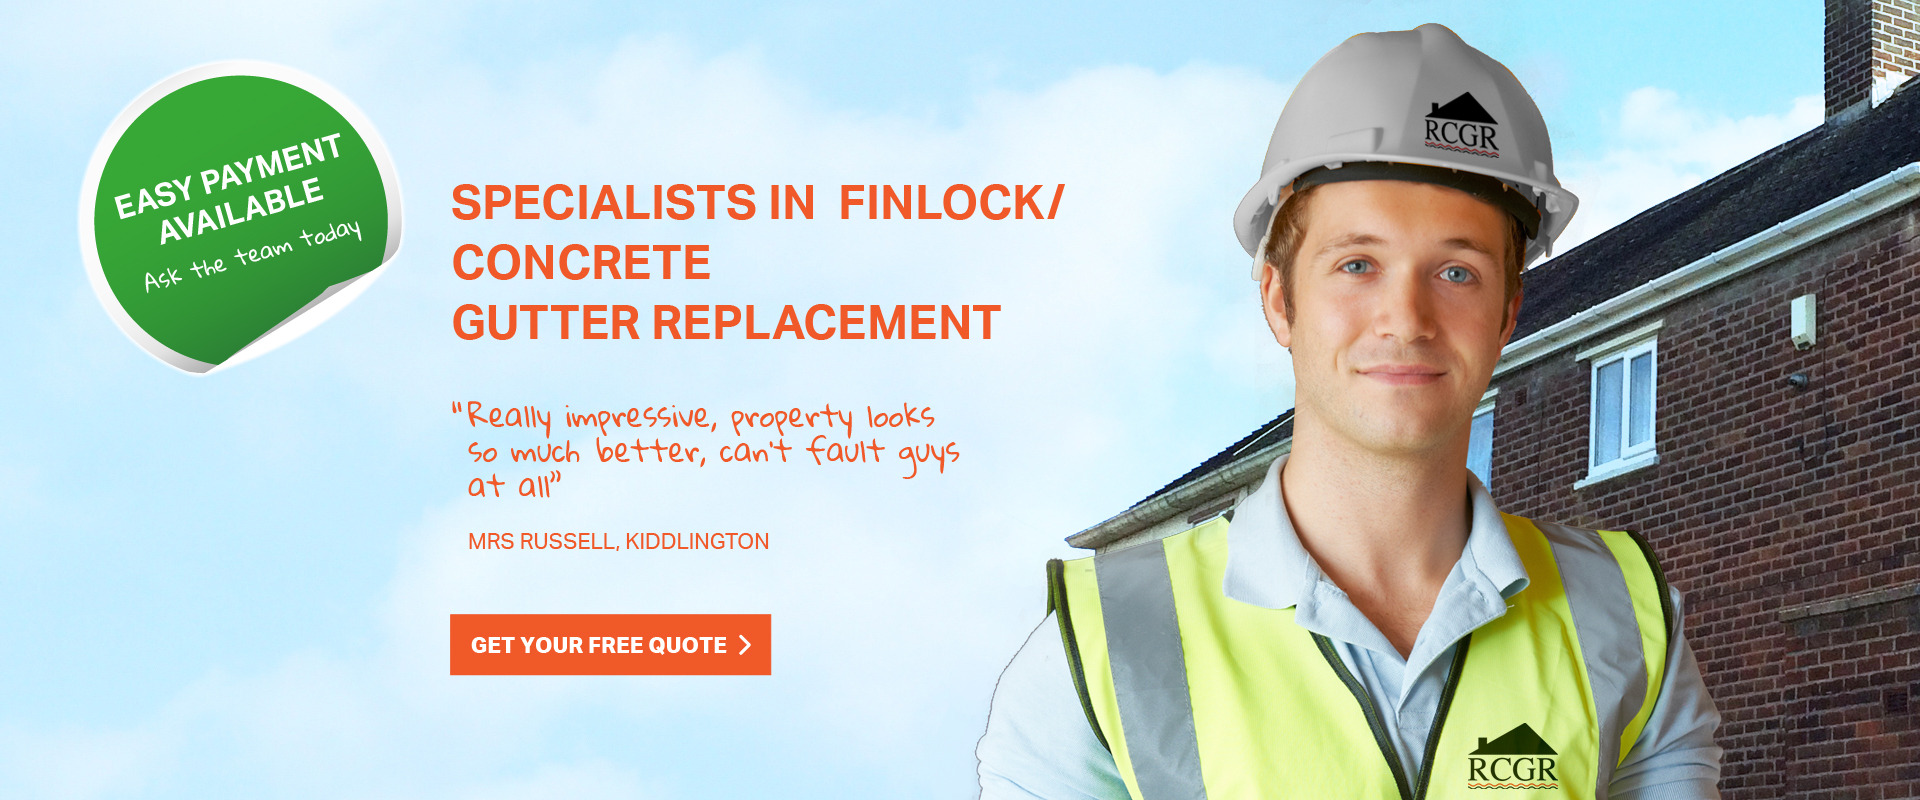 Specialists in Finlock / Concrete Gutter Replacements. Get a FREE quote today.